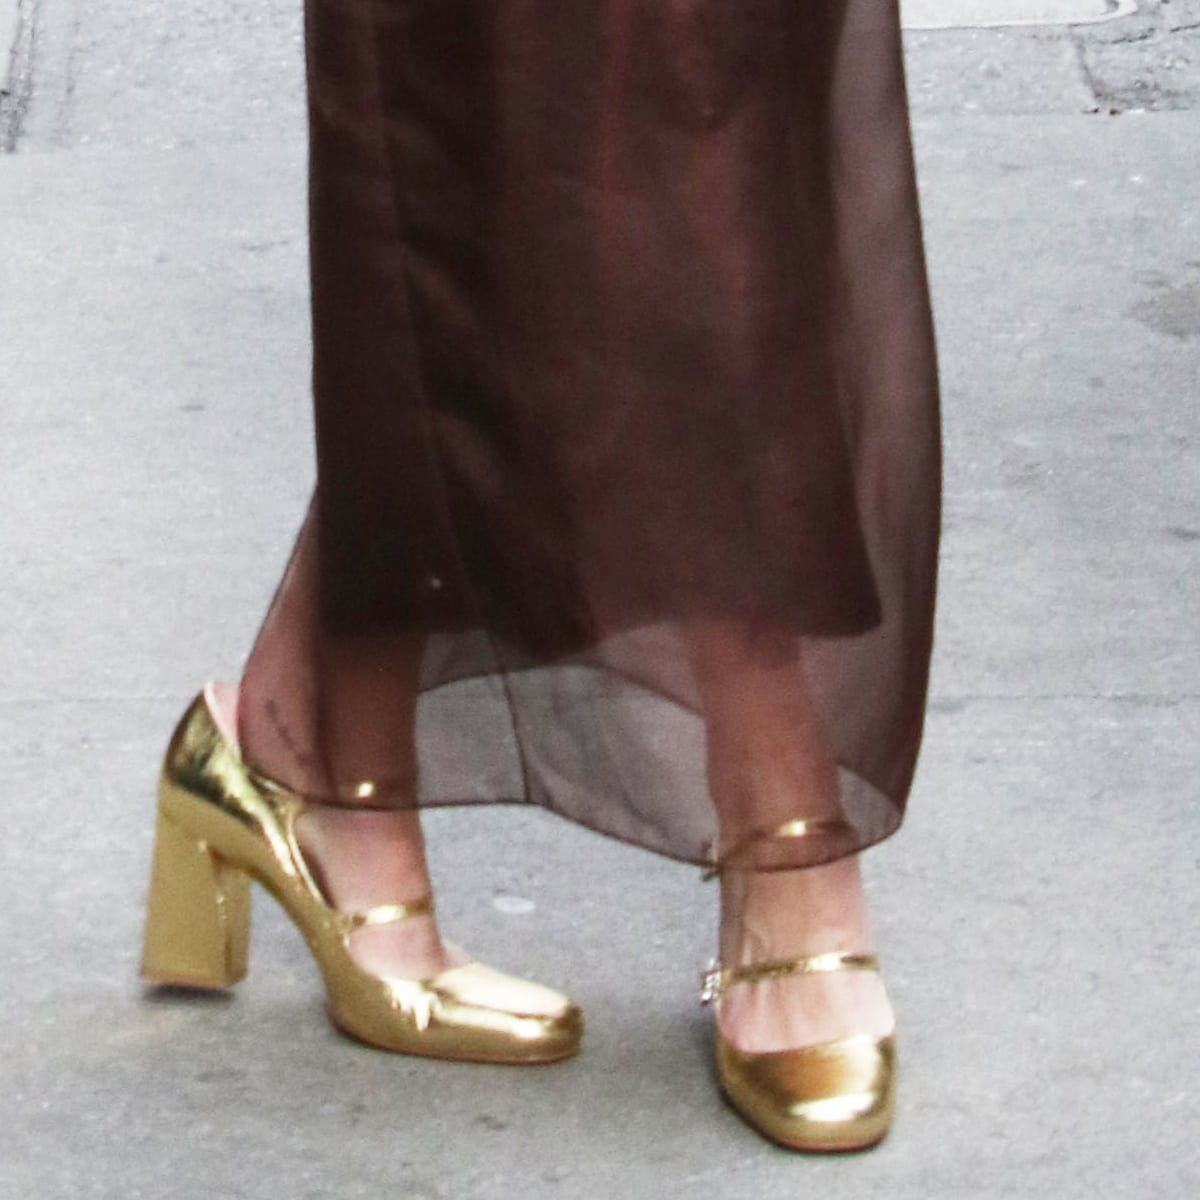 Rebecca Hall's ensemble is impeccably finished with Roger Vivier's gold metallic Mary Janes, adding a splash of luxury and a sparkle of glamour to her every step